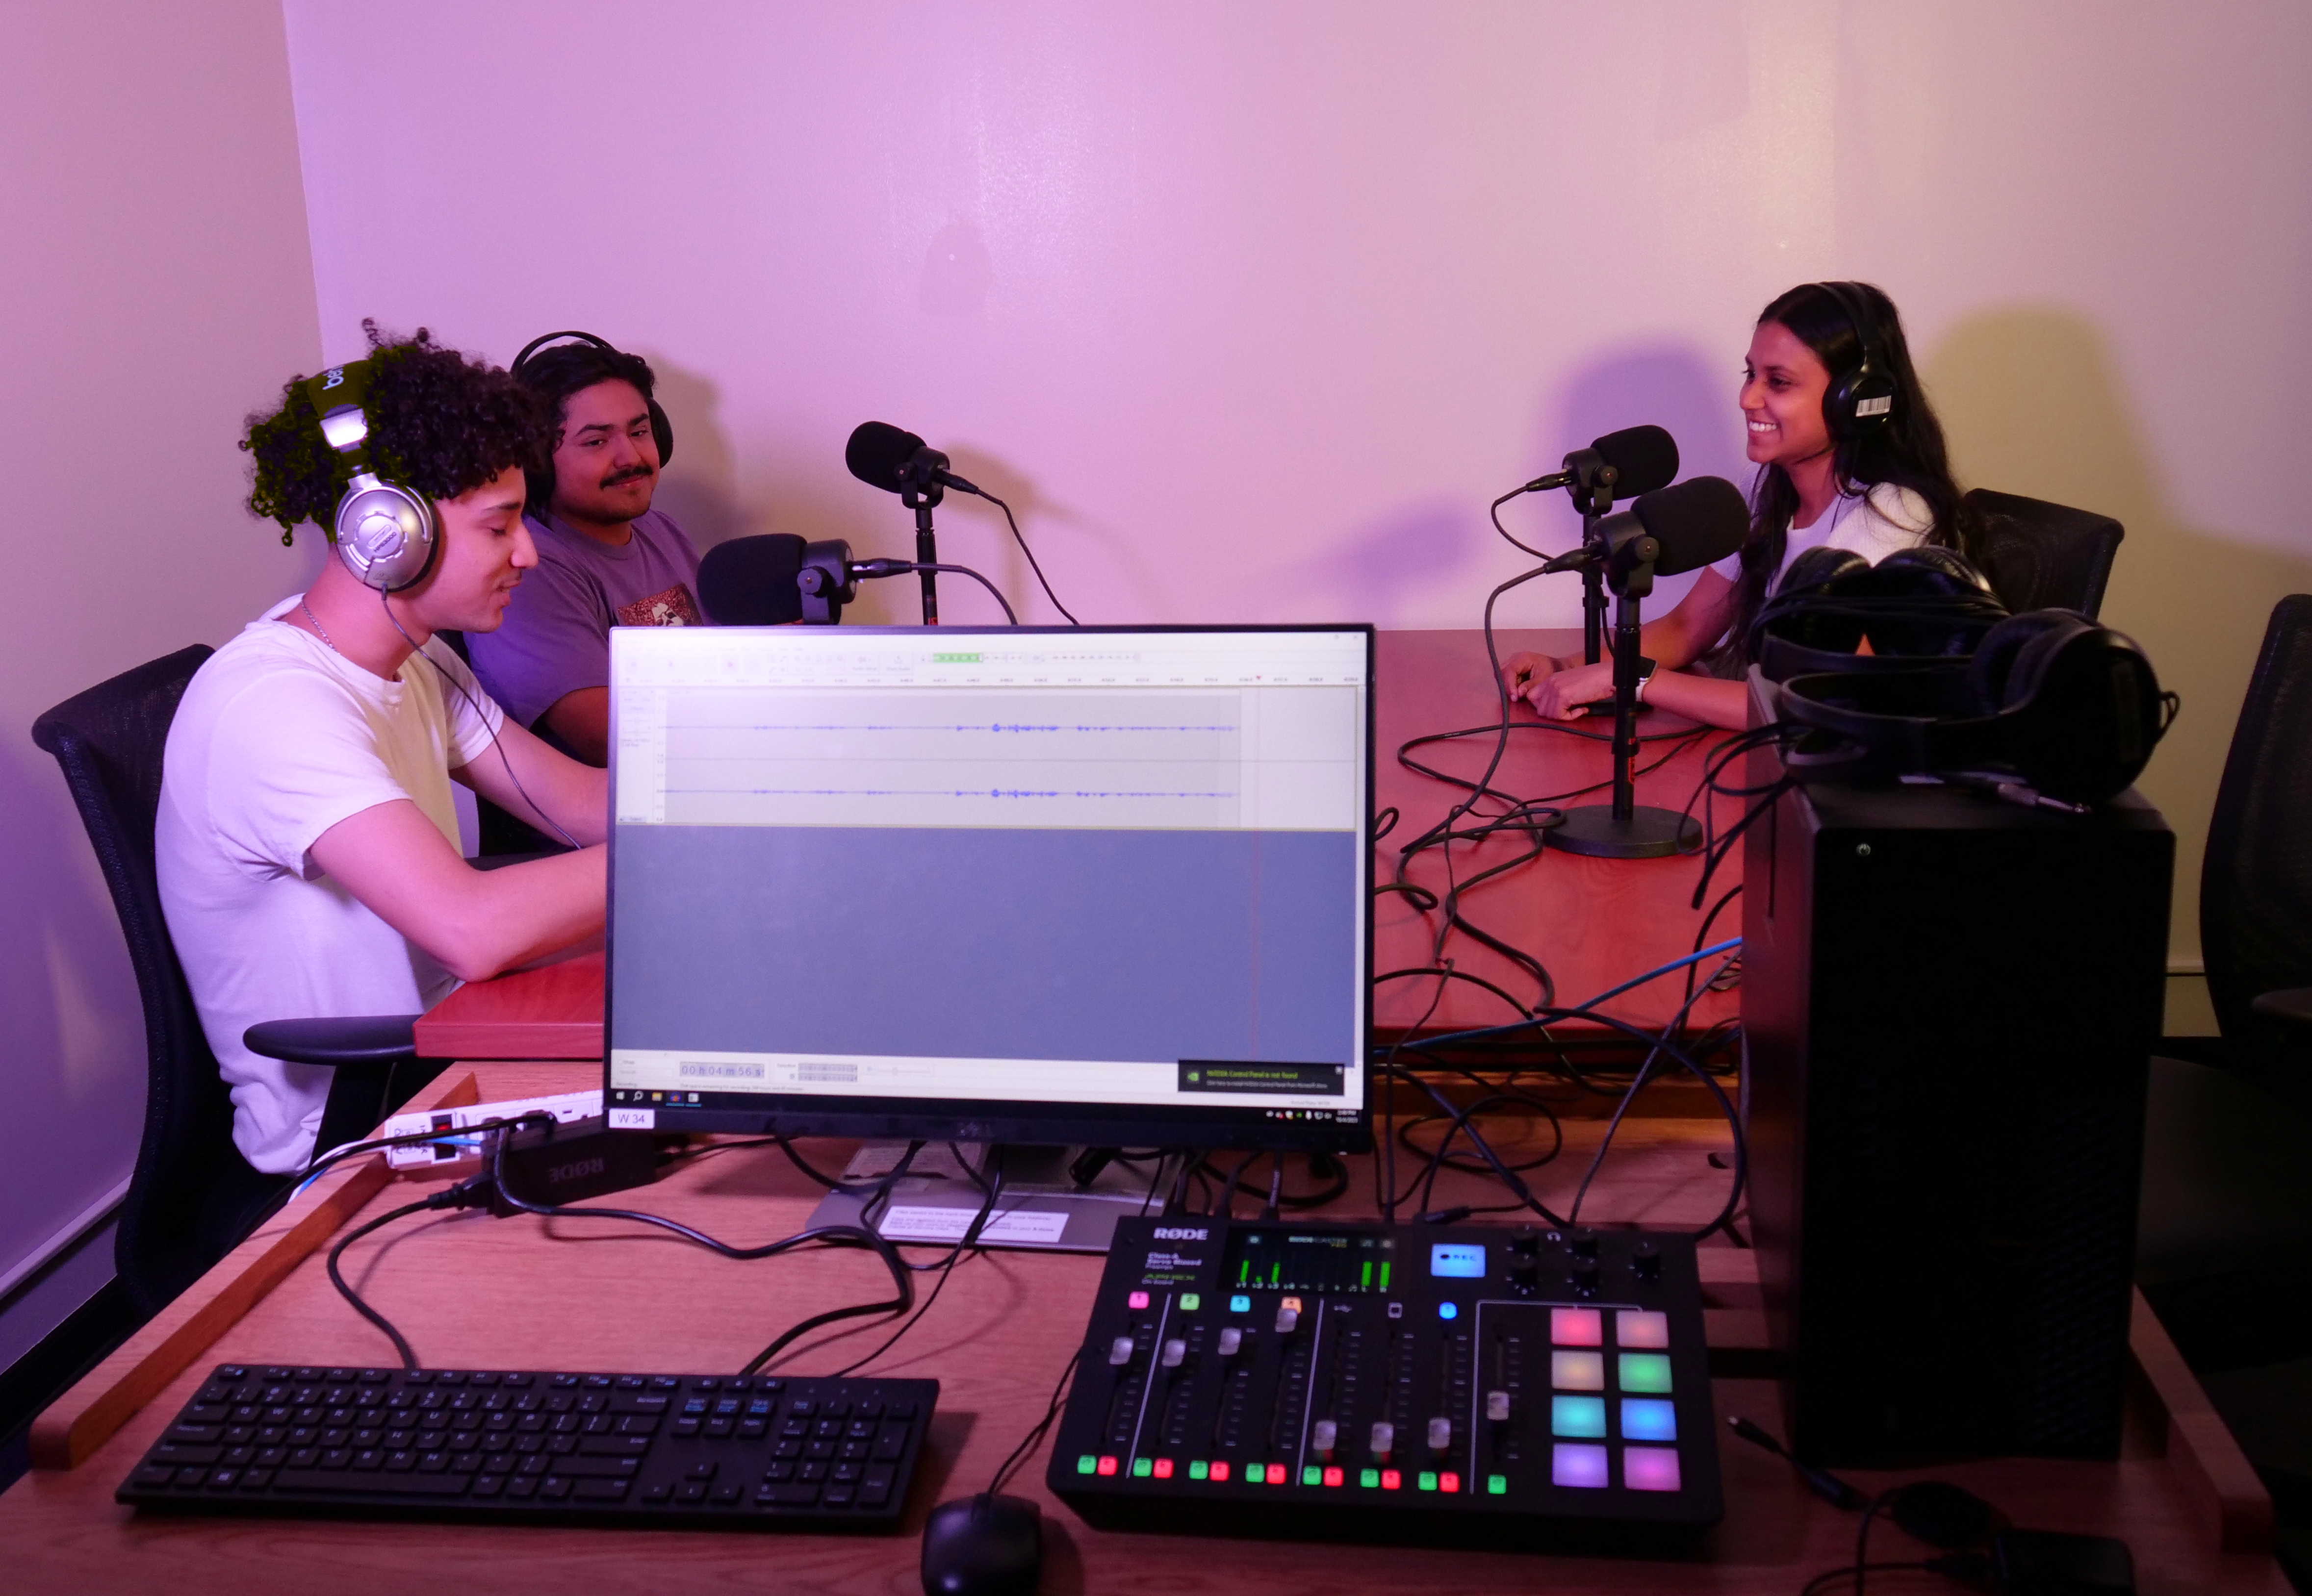 Three people at a table with microphones talking, recording a podcast on a computer